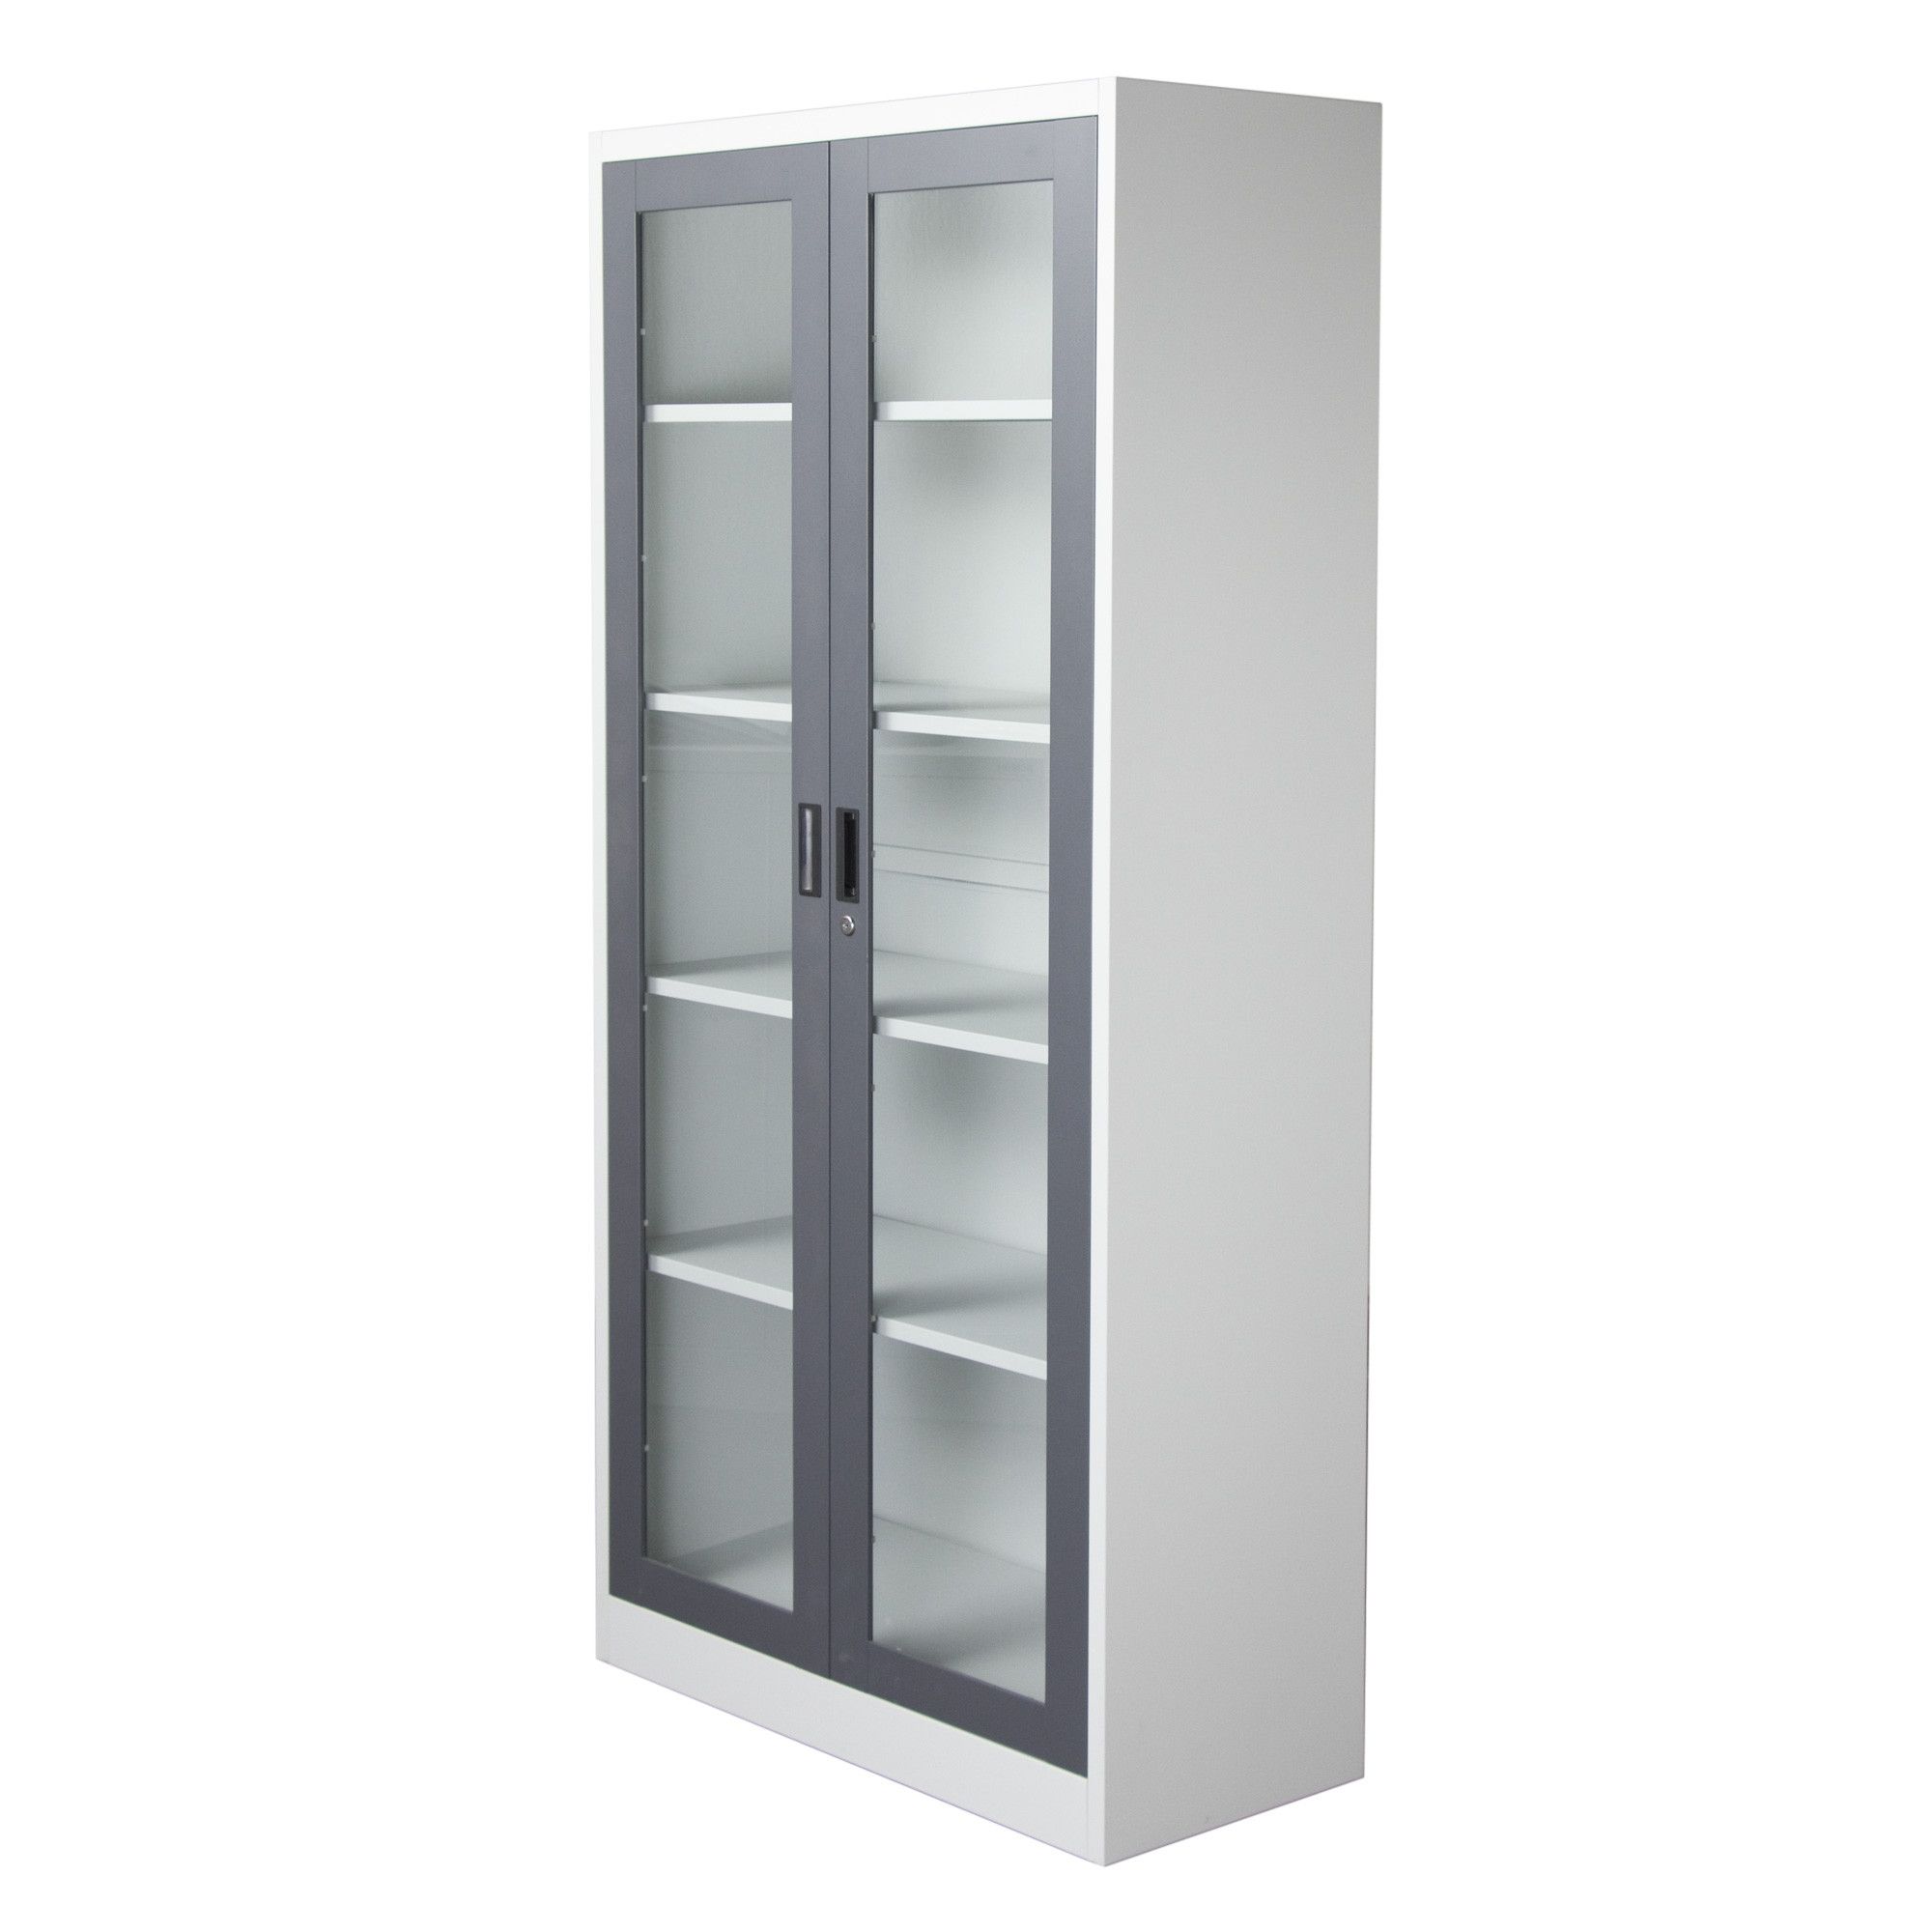 2 Door Bookcase With 5 Shelves In Dark Greyoff White Diamond Throughout Off White Bookcase (View 6 of 15)